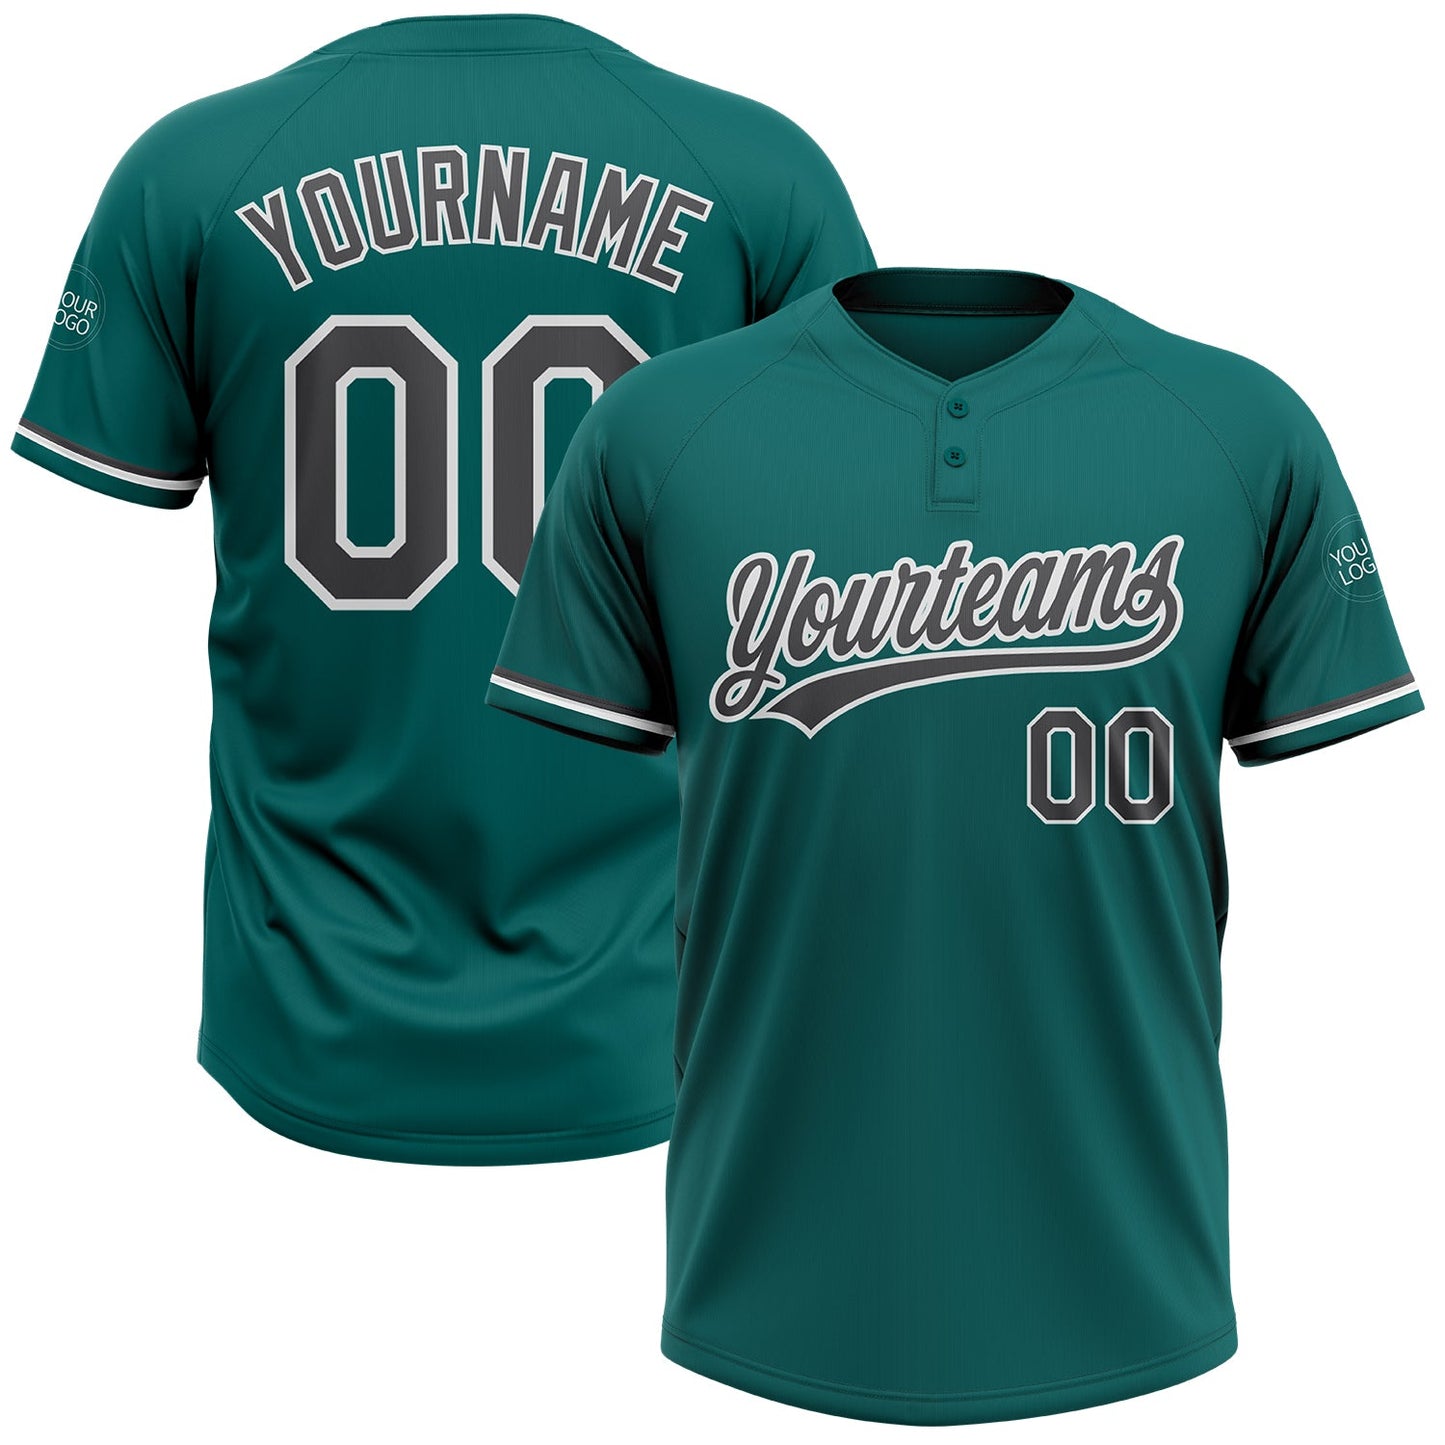 Custom Teal Steel Gray-White Two-Button Unisex Softball Jersey